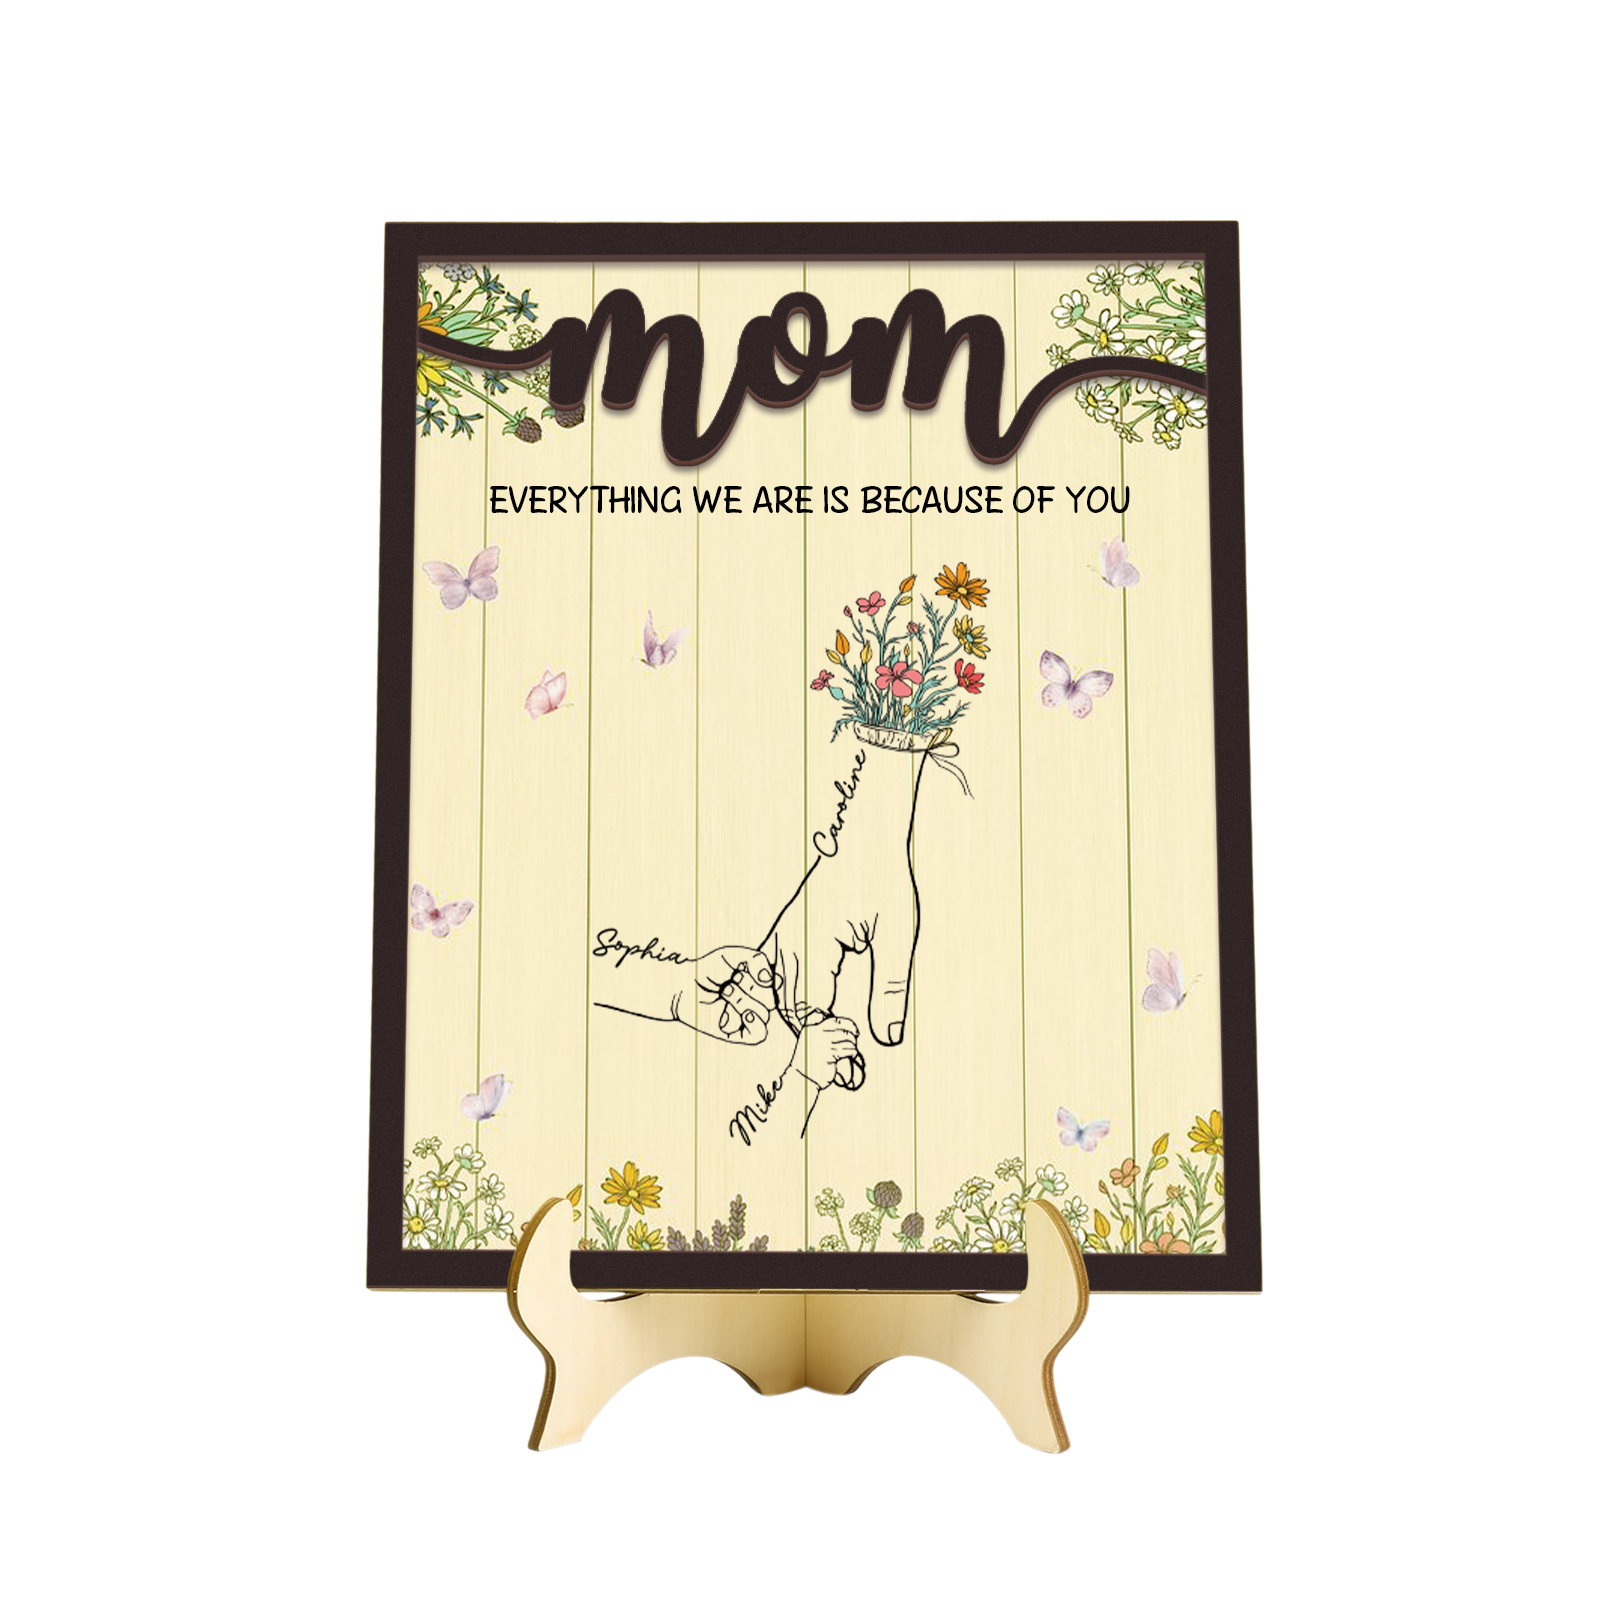 3 Names - Personalized Customizable Text Home Frame Wooden Ornament Holding Hands Flower Elements Style Ornament for Mom